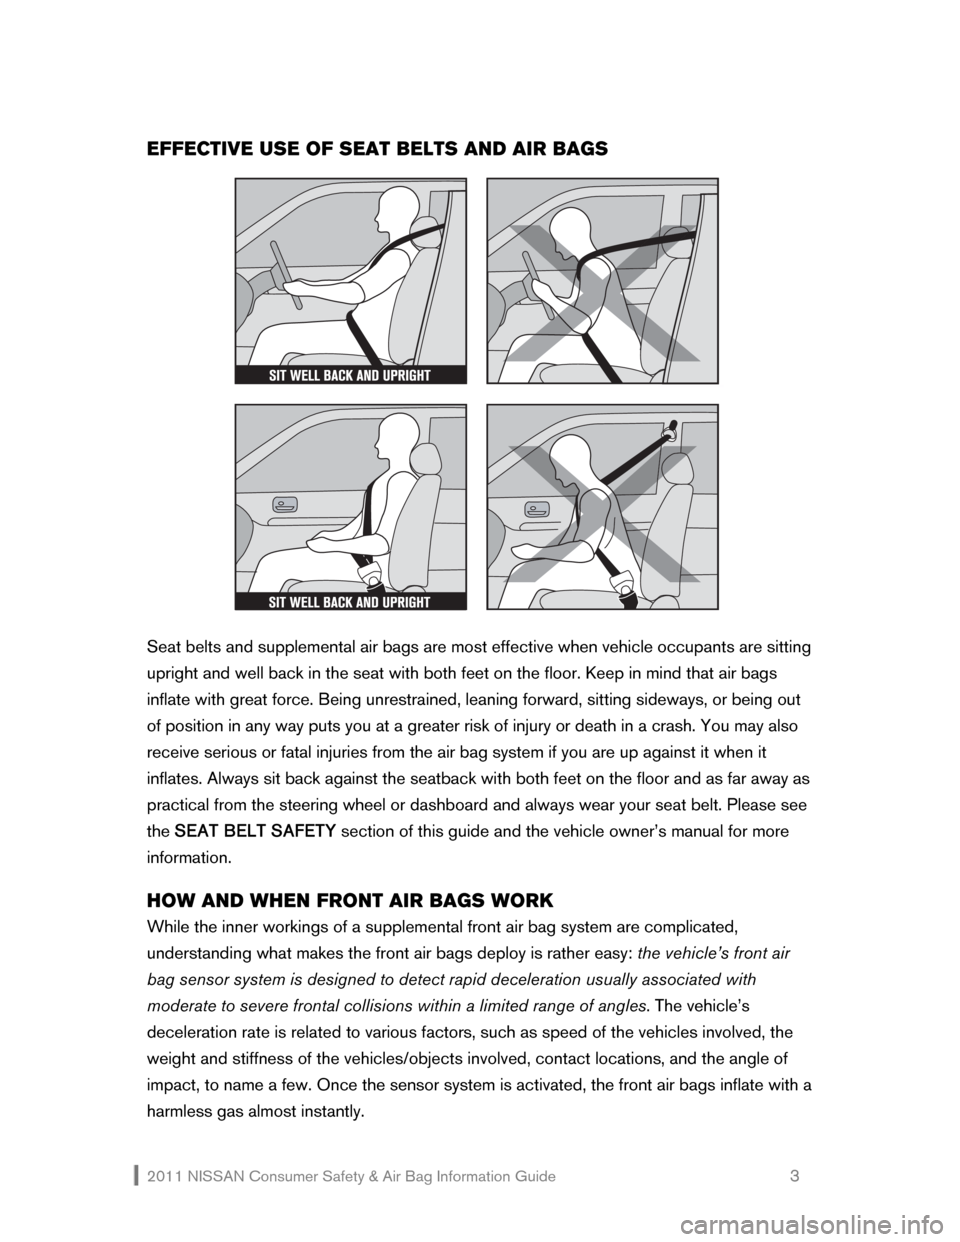 NISSAN JUKE 2011 F15 / 1.G Consumer Safety Air Bag Information Guide 2011 NISSAN Consumer Safety & Air Bag Information Guide                                                       3 
EFFECTIVE USE OF SEAT BELTS AND AIR BAGS 
 
 
 
Seat belts and supplemental air bags ar